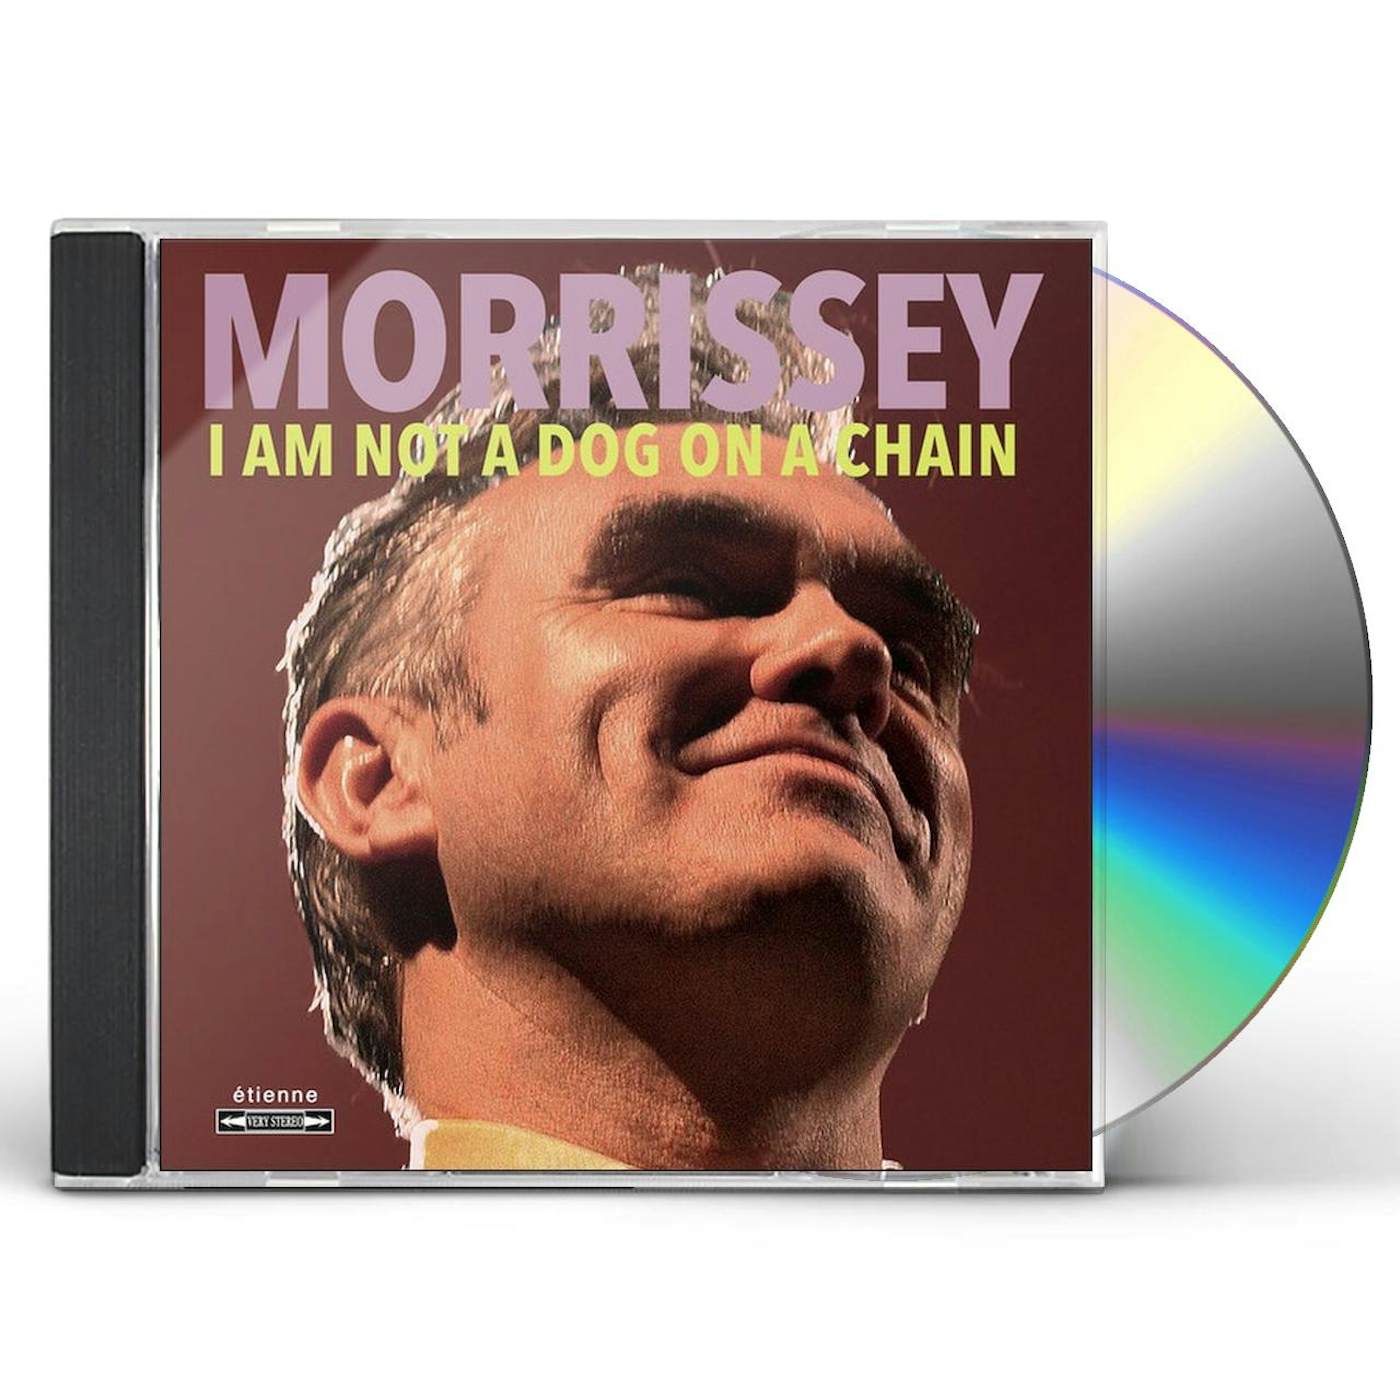 Morrissey I AM NOT A DOG ON A CHAIN CD